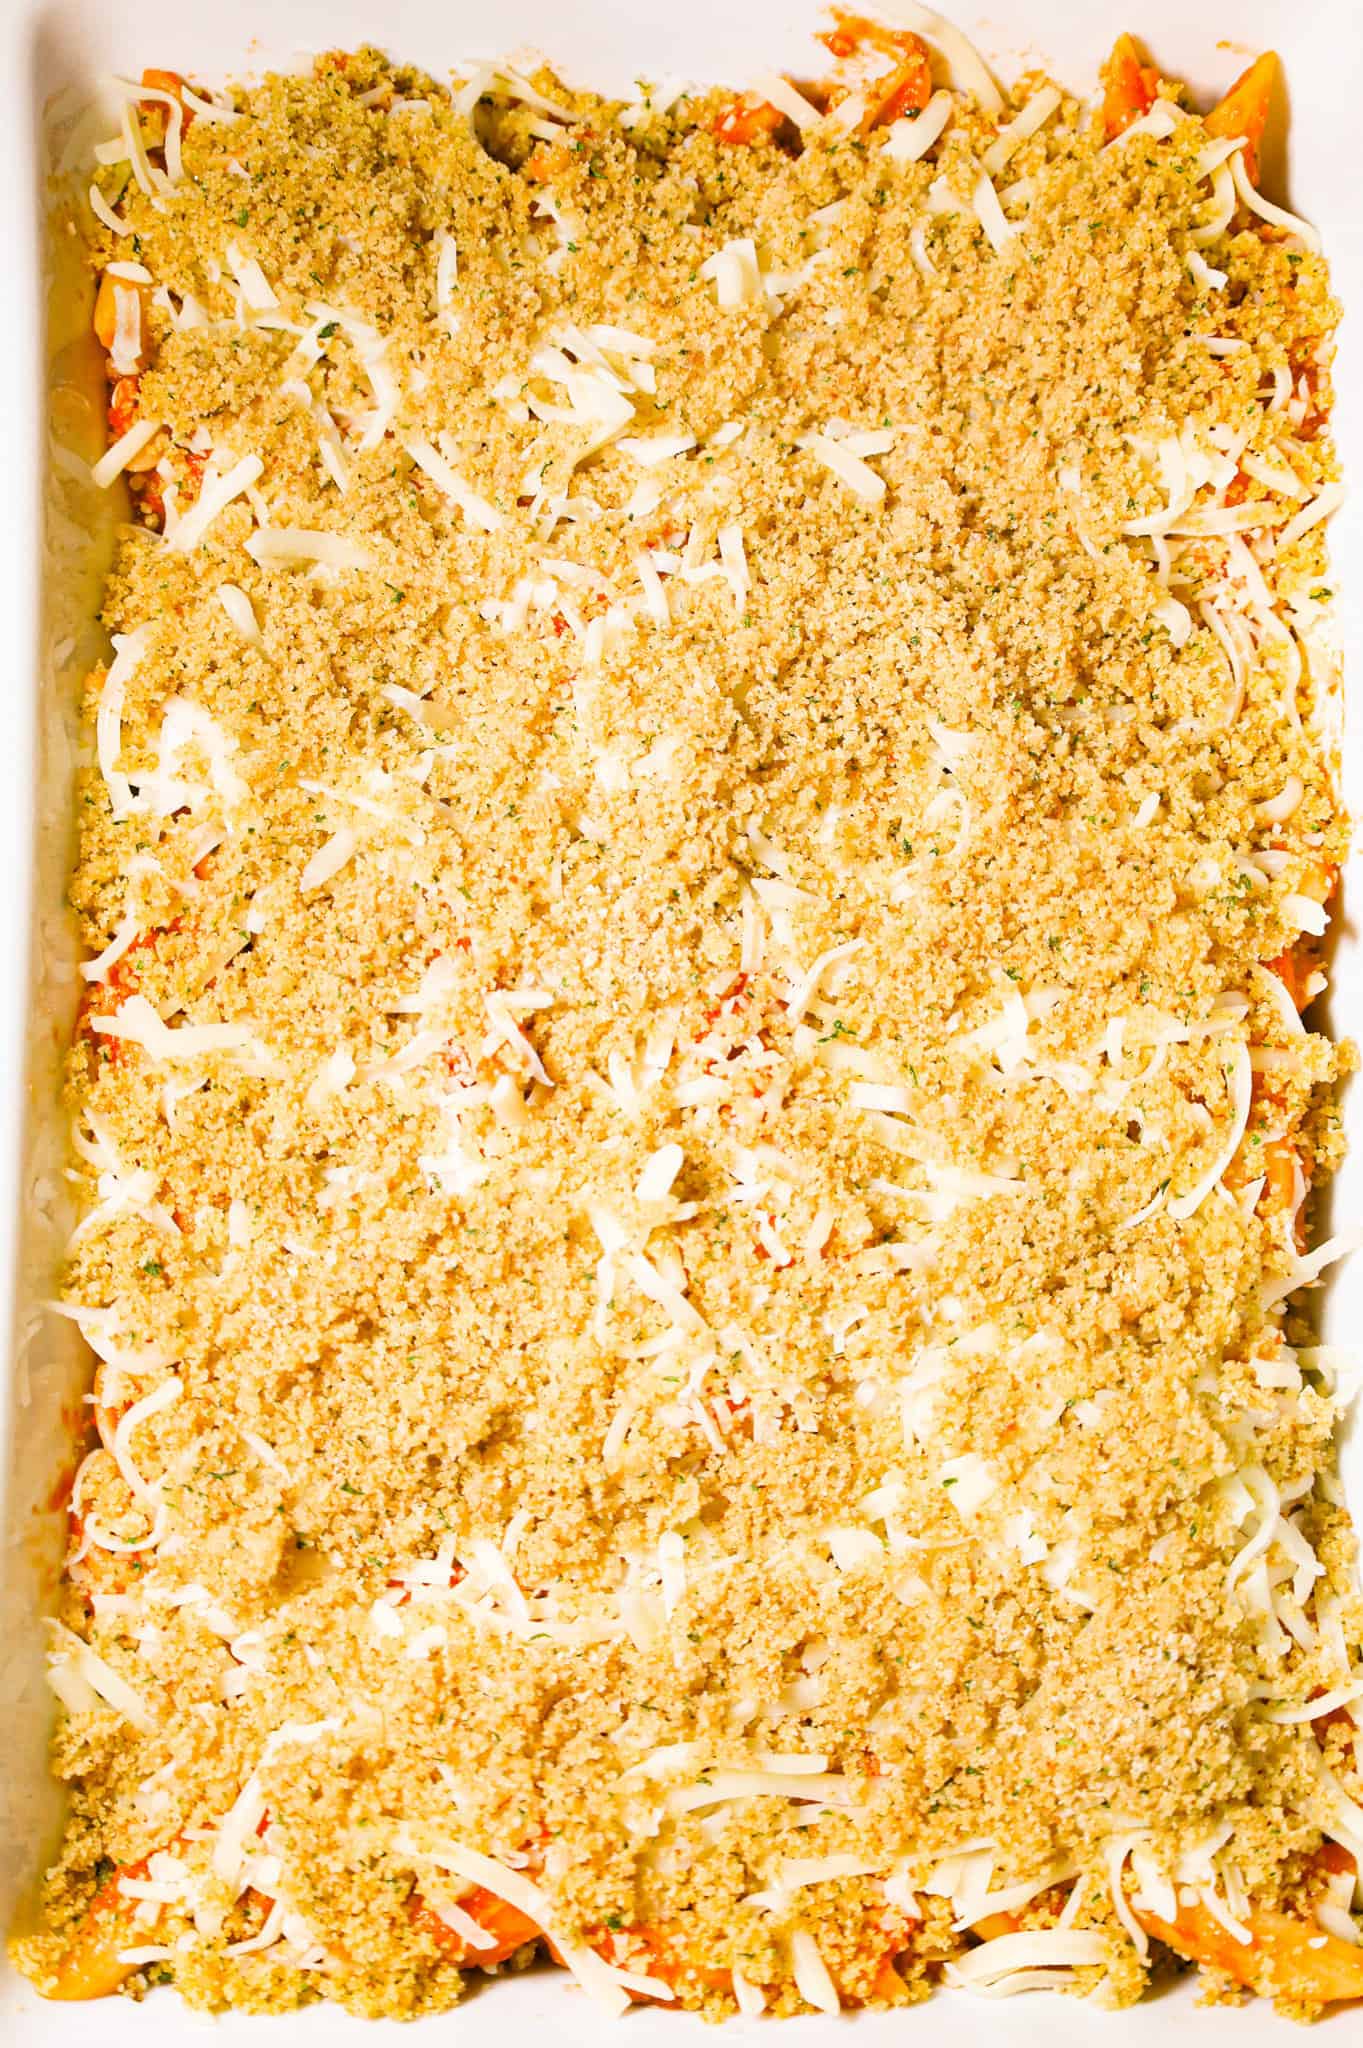 bread crumb mixture sprinkled on top of shredded cheese and pasta in a baking dish